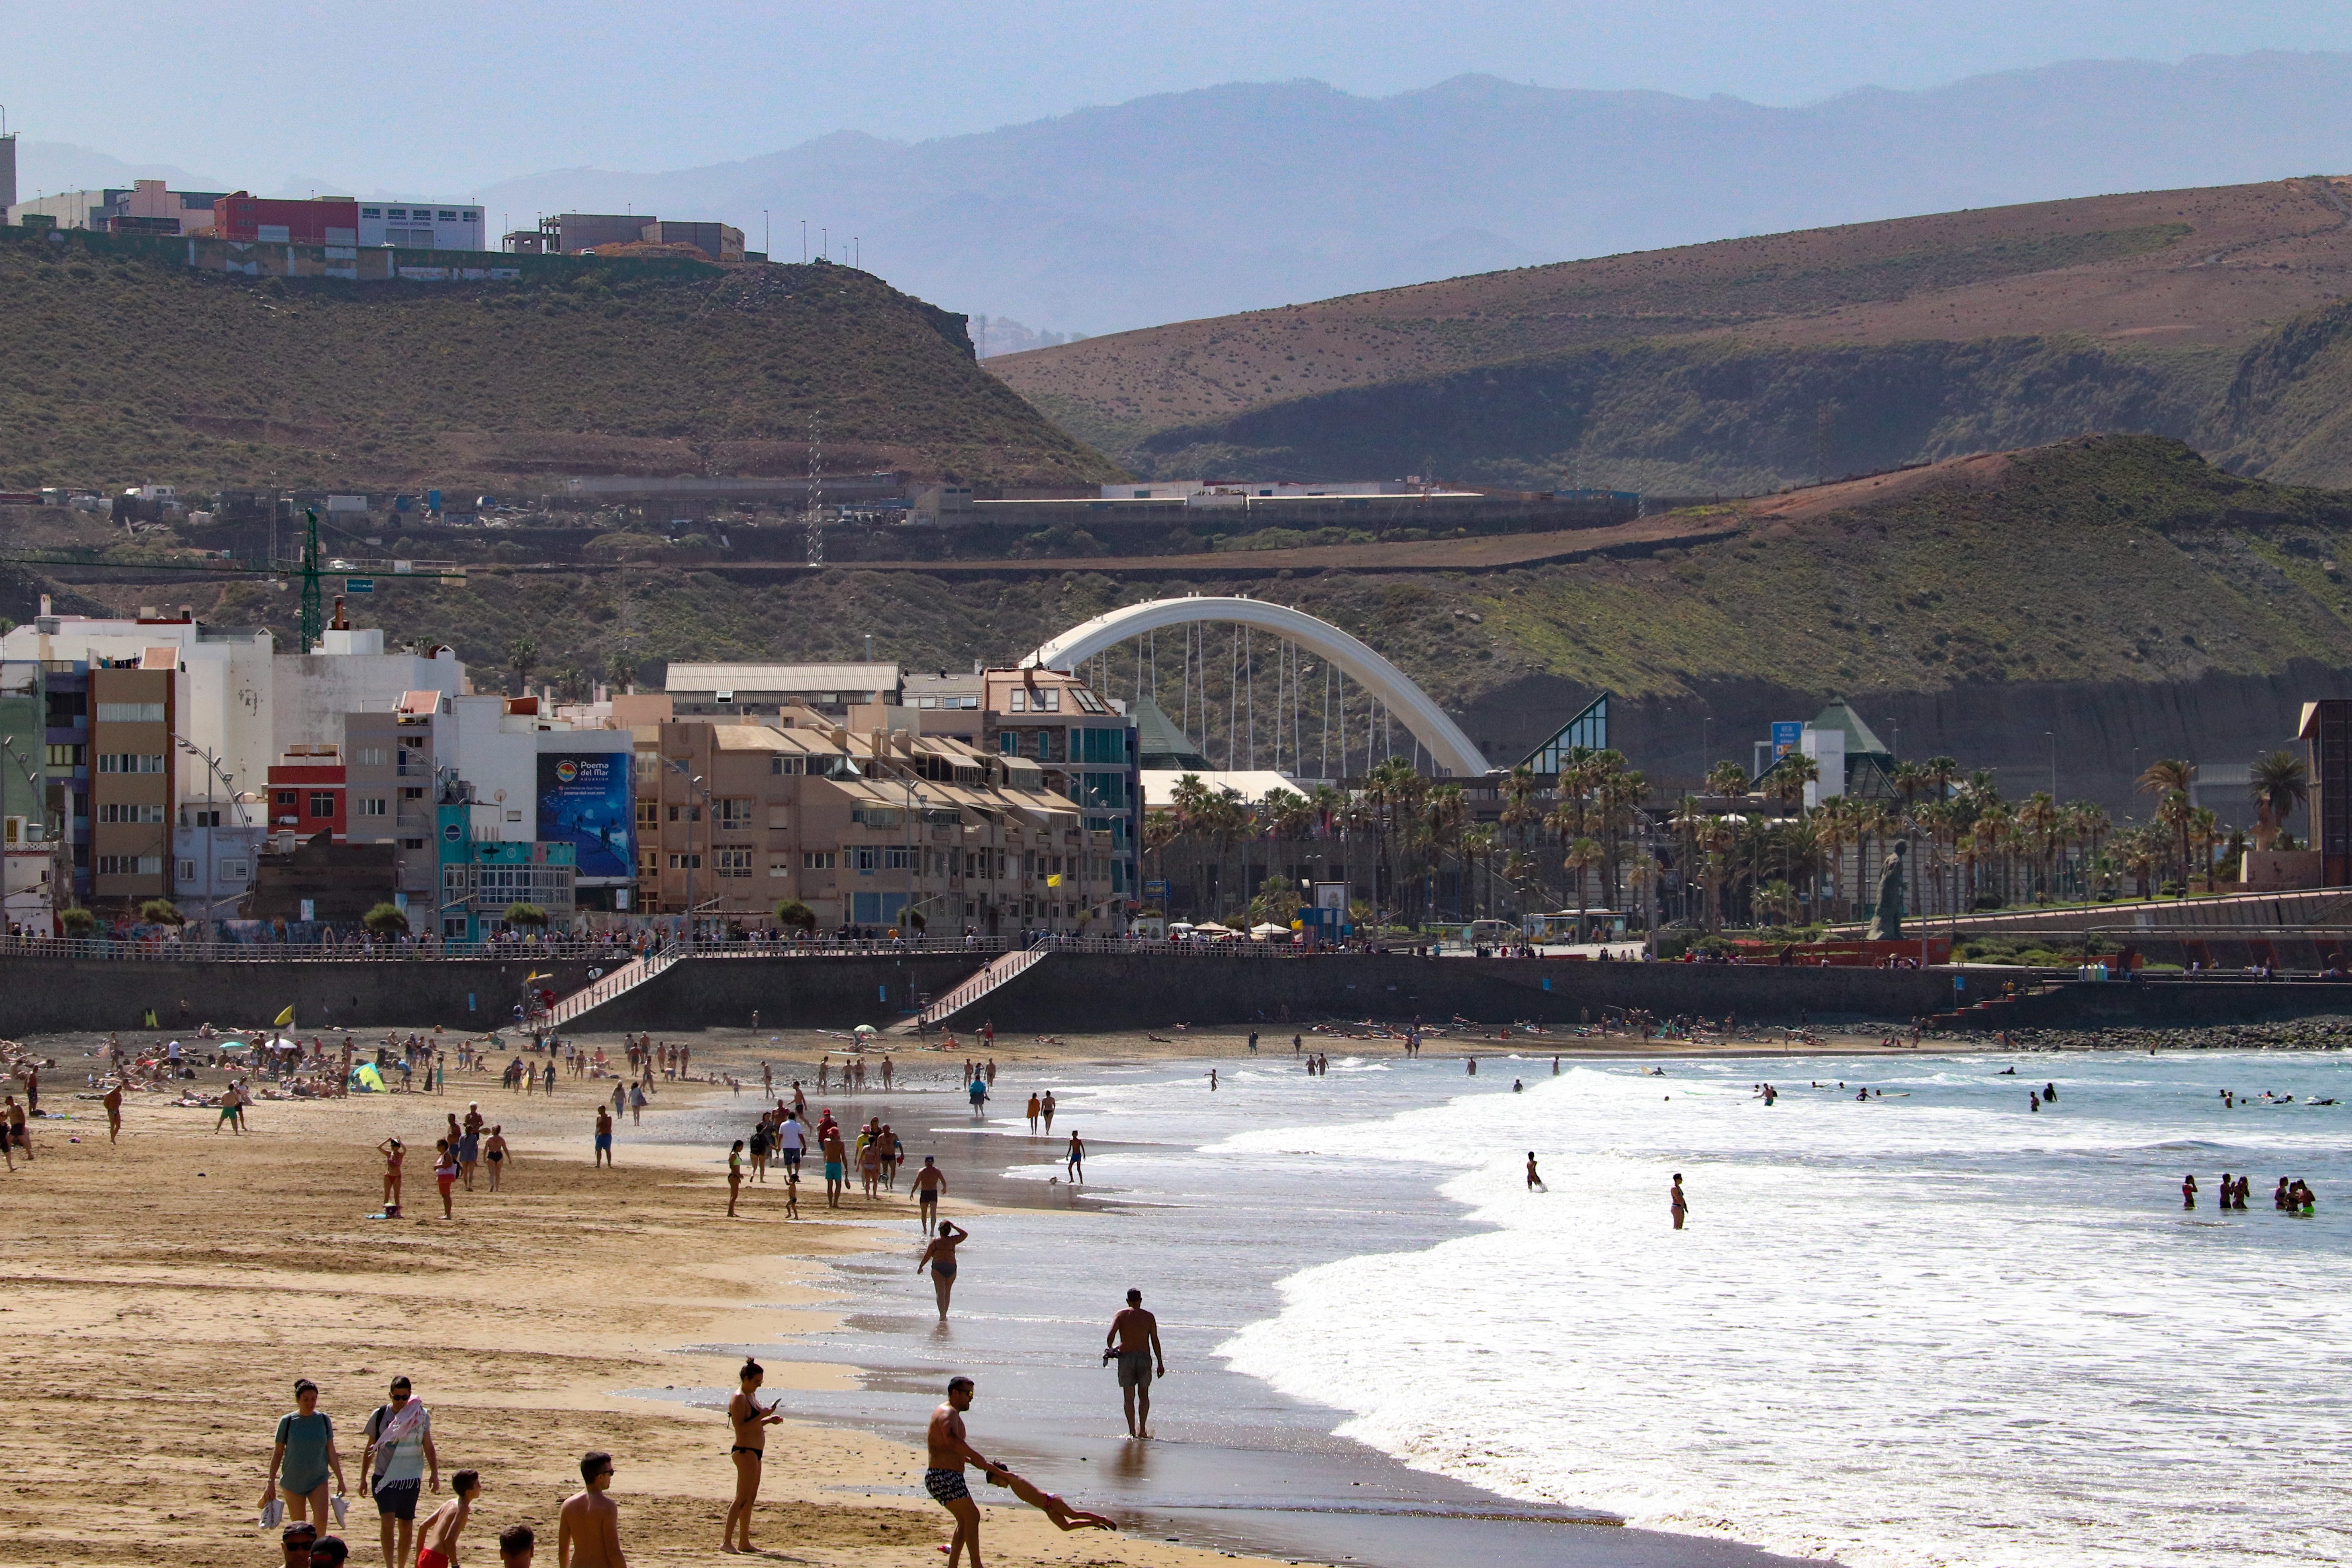 A view of the Playa de Las Canteras with the mountains of Gran Canaria visible in the distance.